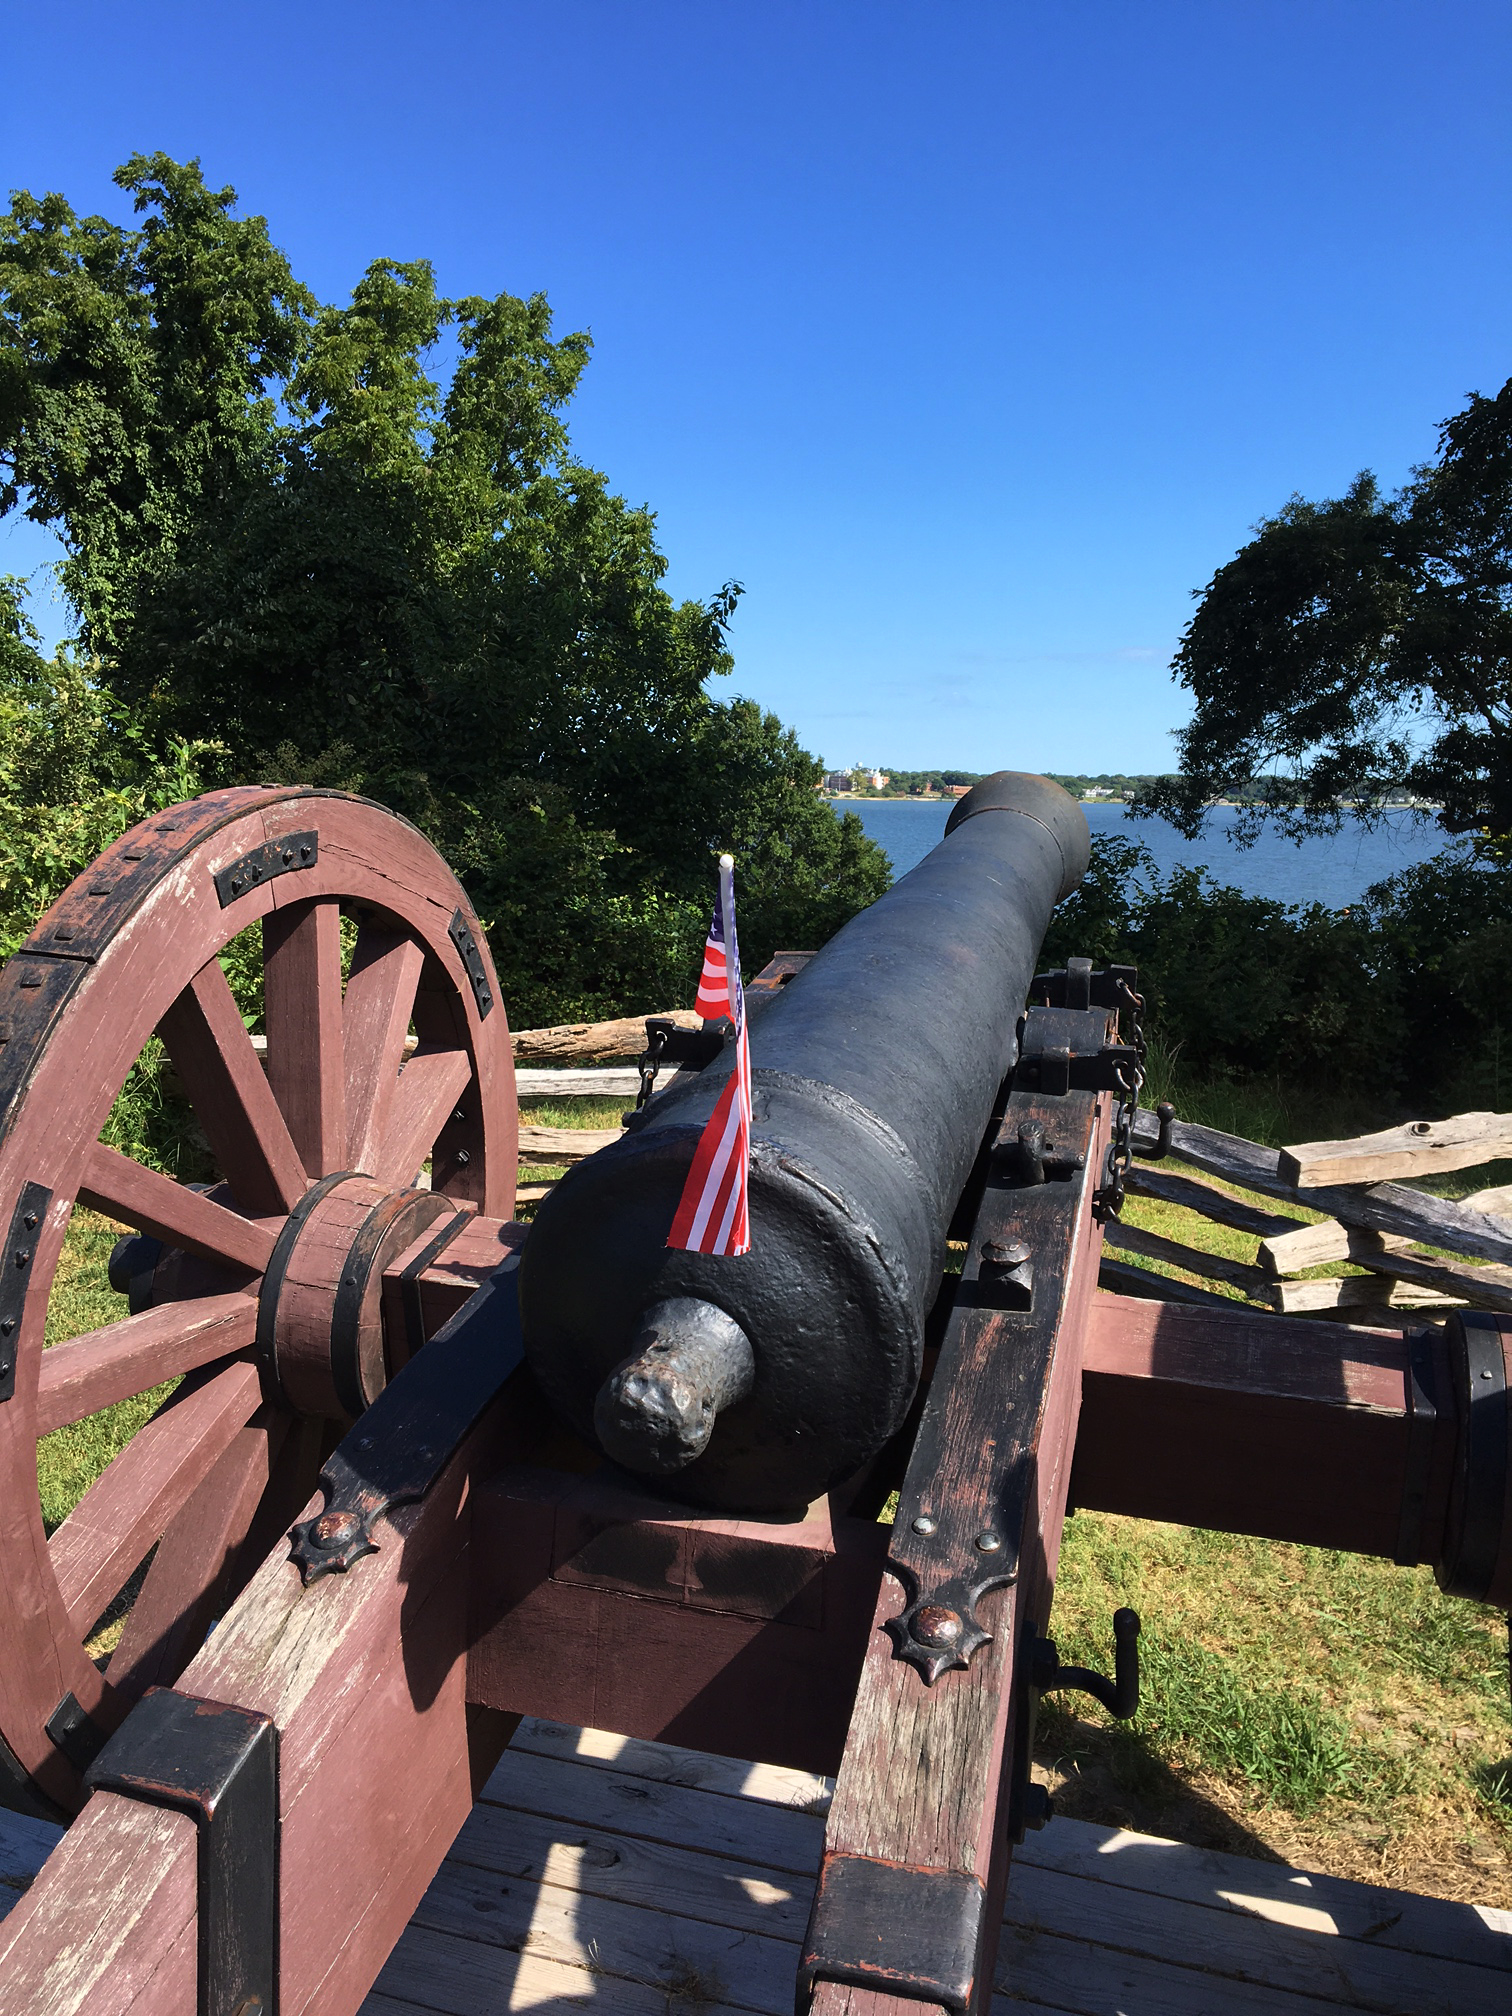 The National Park Service's Yorktown Battlefield is a great stop in the historic triangle. (Cheryl Welch | Travel Beat Magazine)